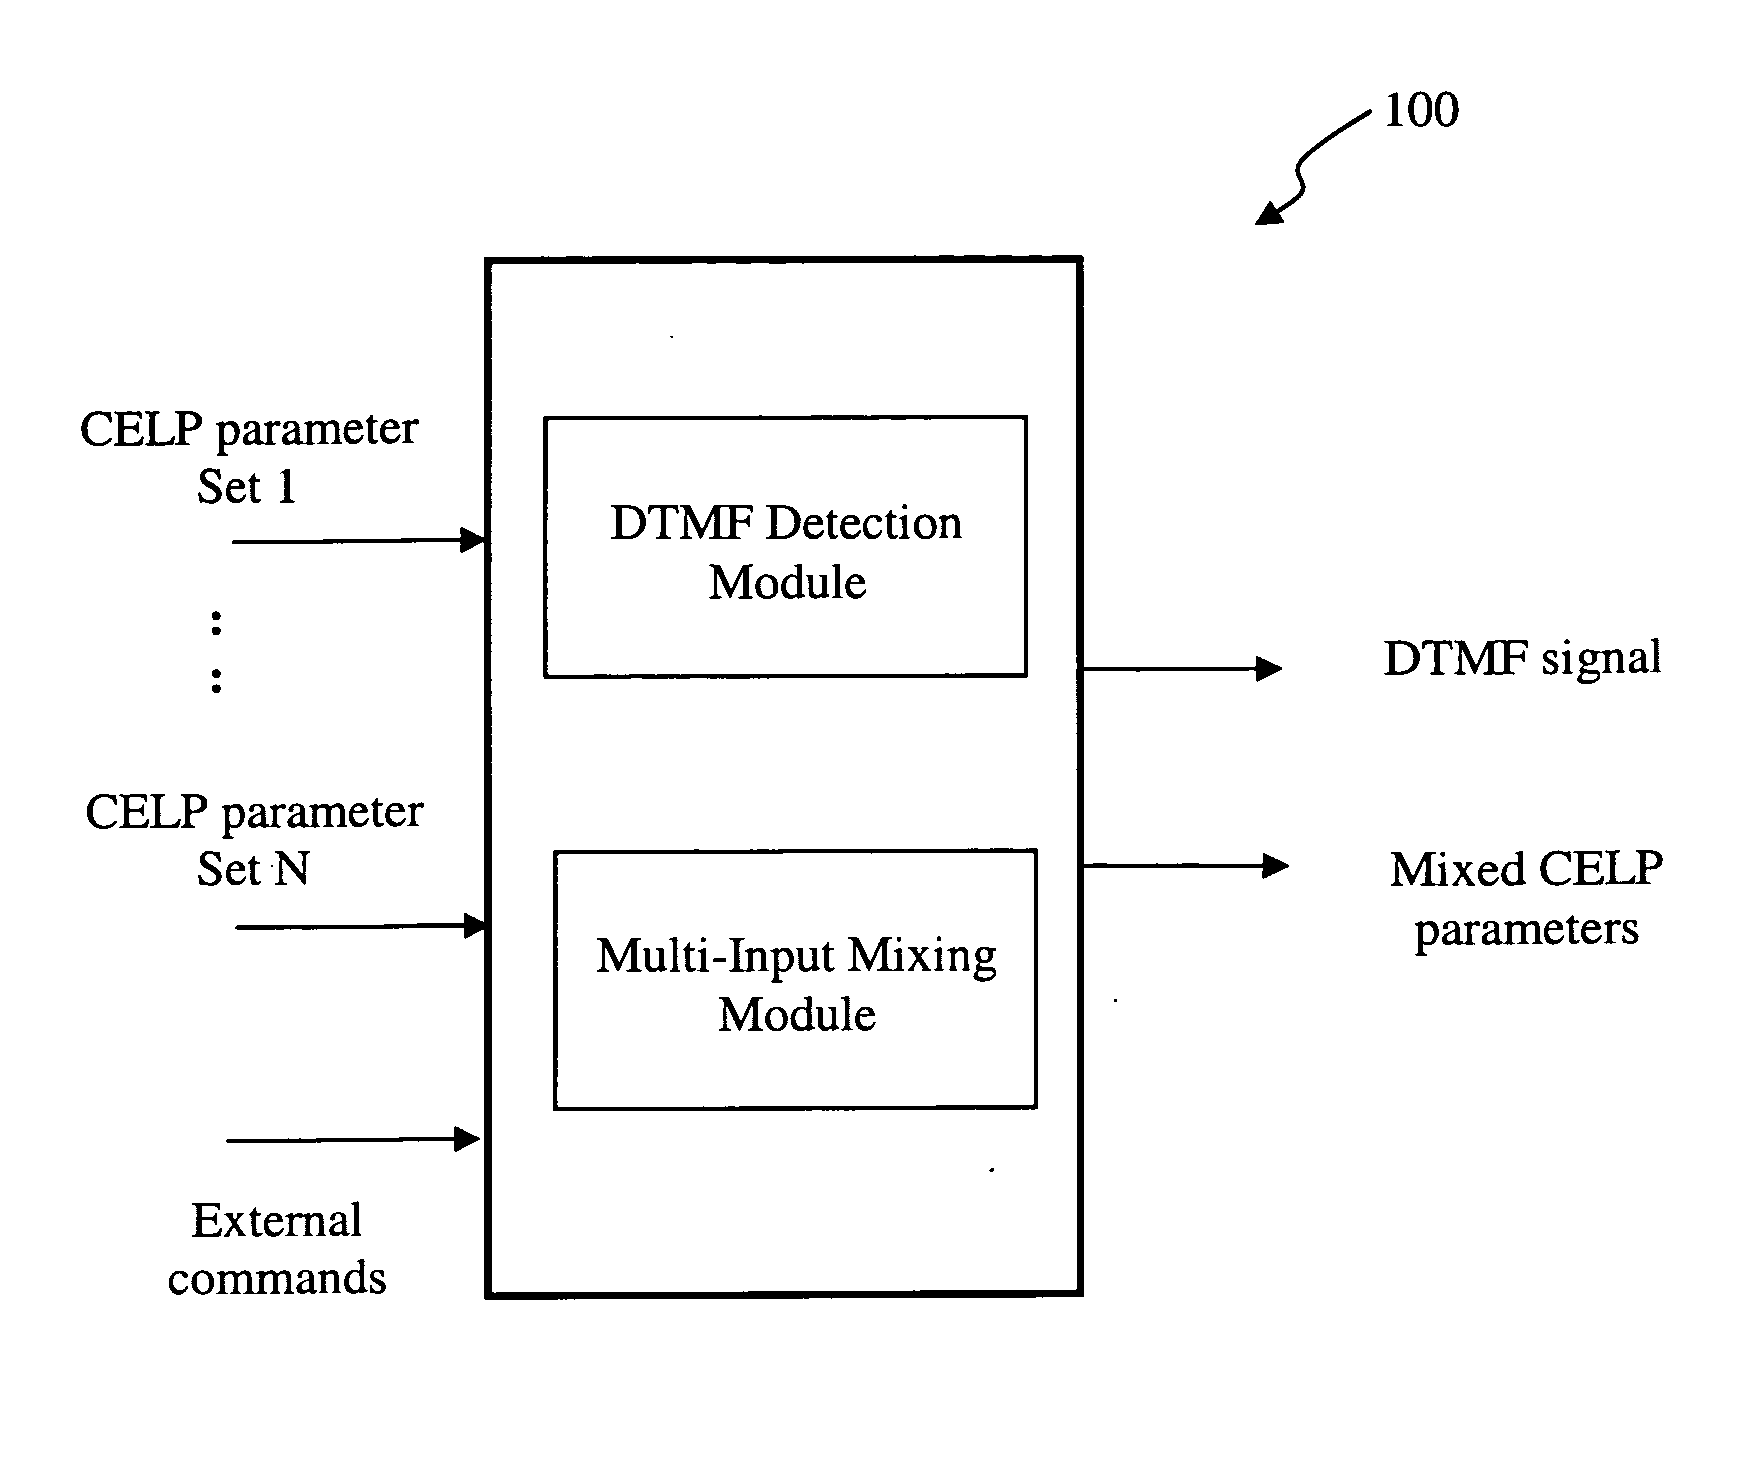 Method and apparatus for DTMF detection and voice mixing in the CELP parameter domain